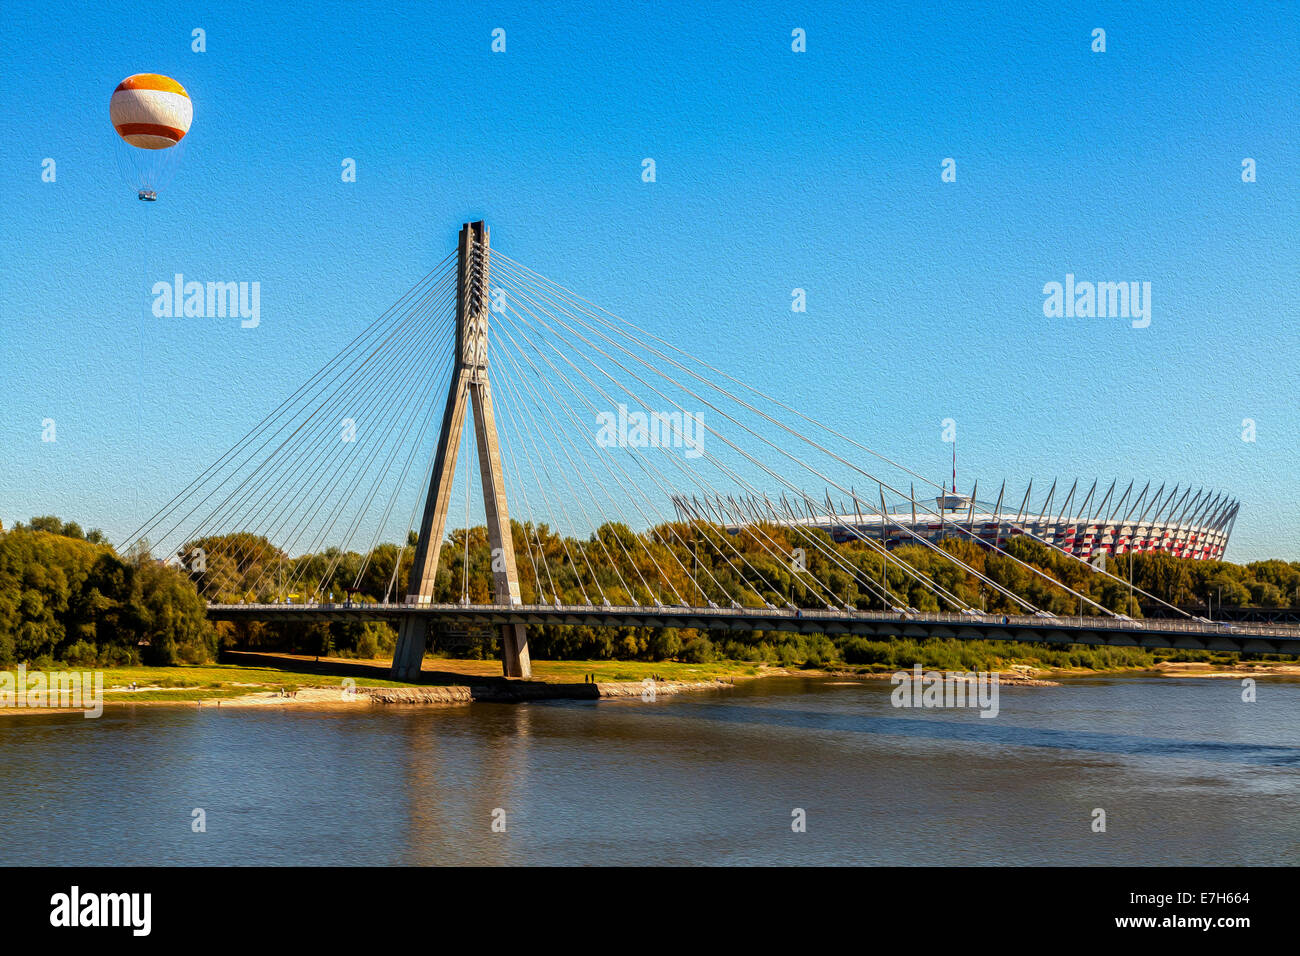 Oil painting style picture of bridge, hot-air balloon and stadium over Vistula river in Warsaw, Poland. Stock Photo